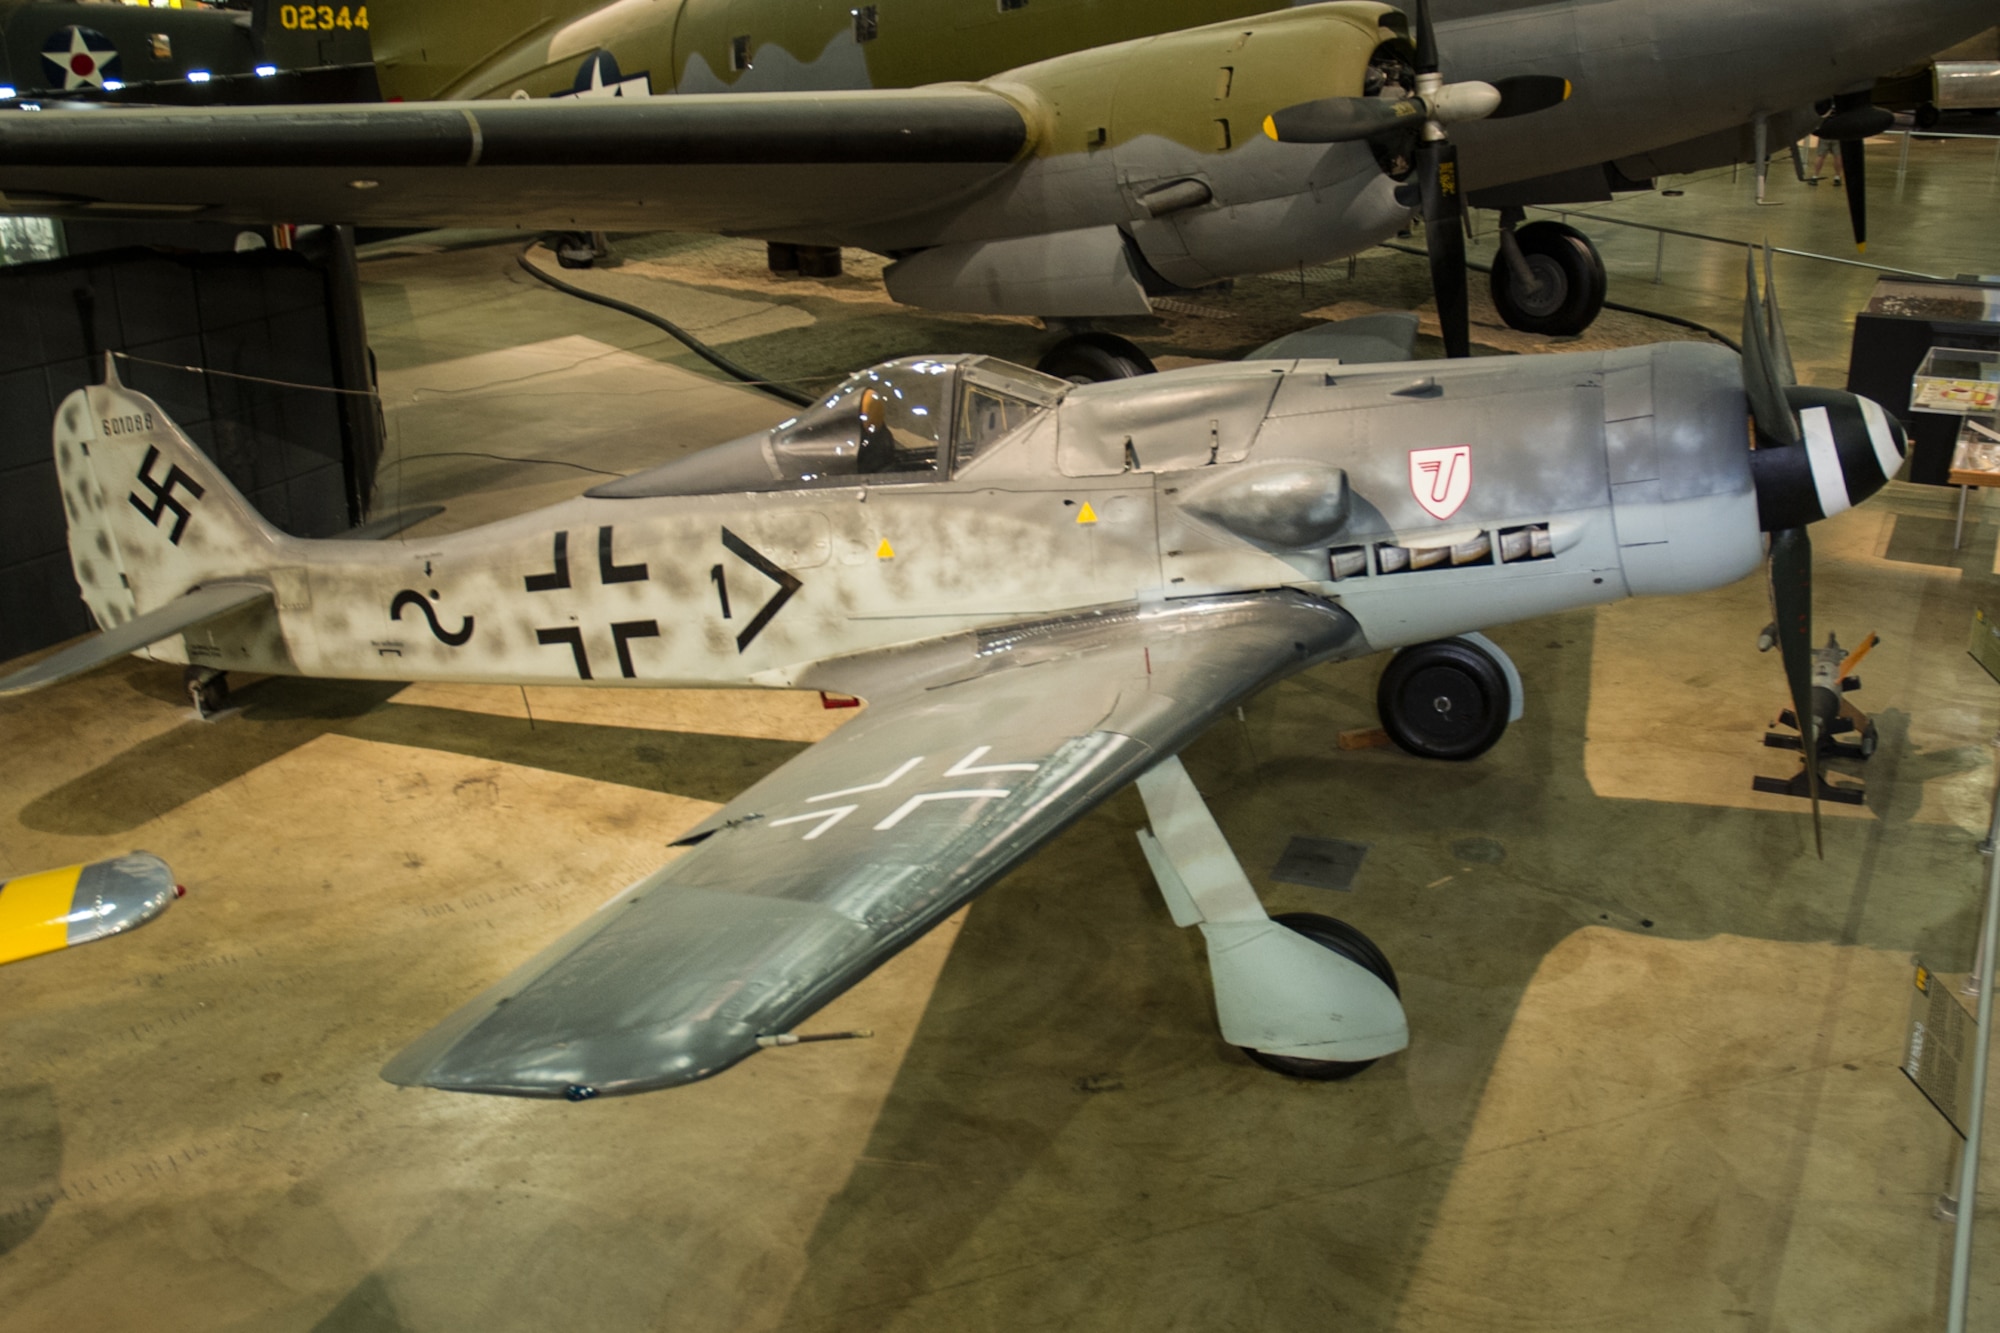 DAYTON, Ohio -- Focke-Wulf Fw 190D-9 in the World War II Gallery at the National Museum of the United States Air Force. (U.S. Air Force photo)